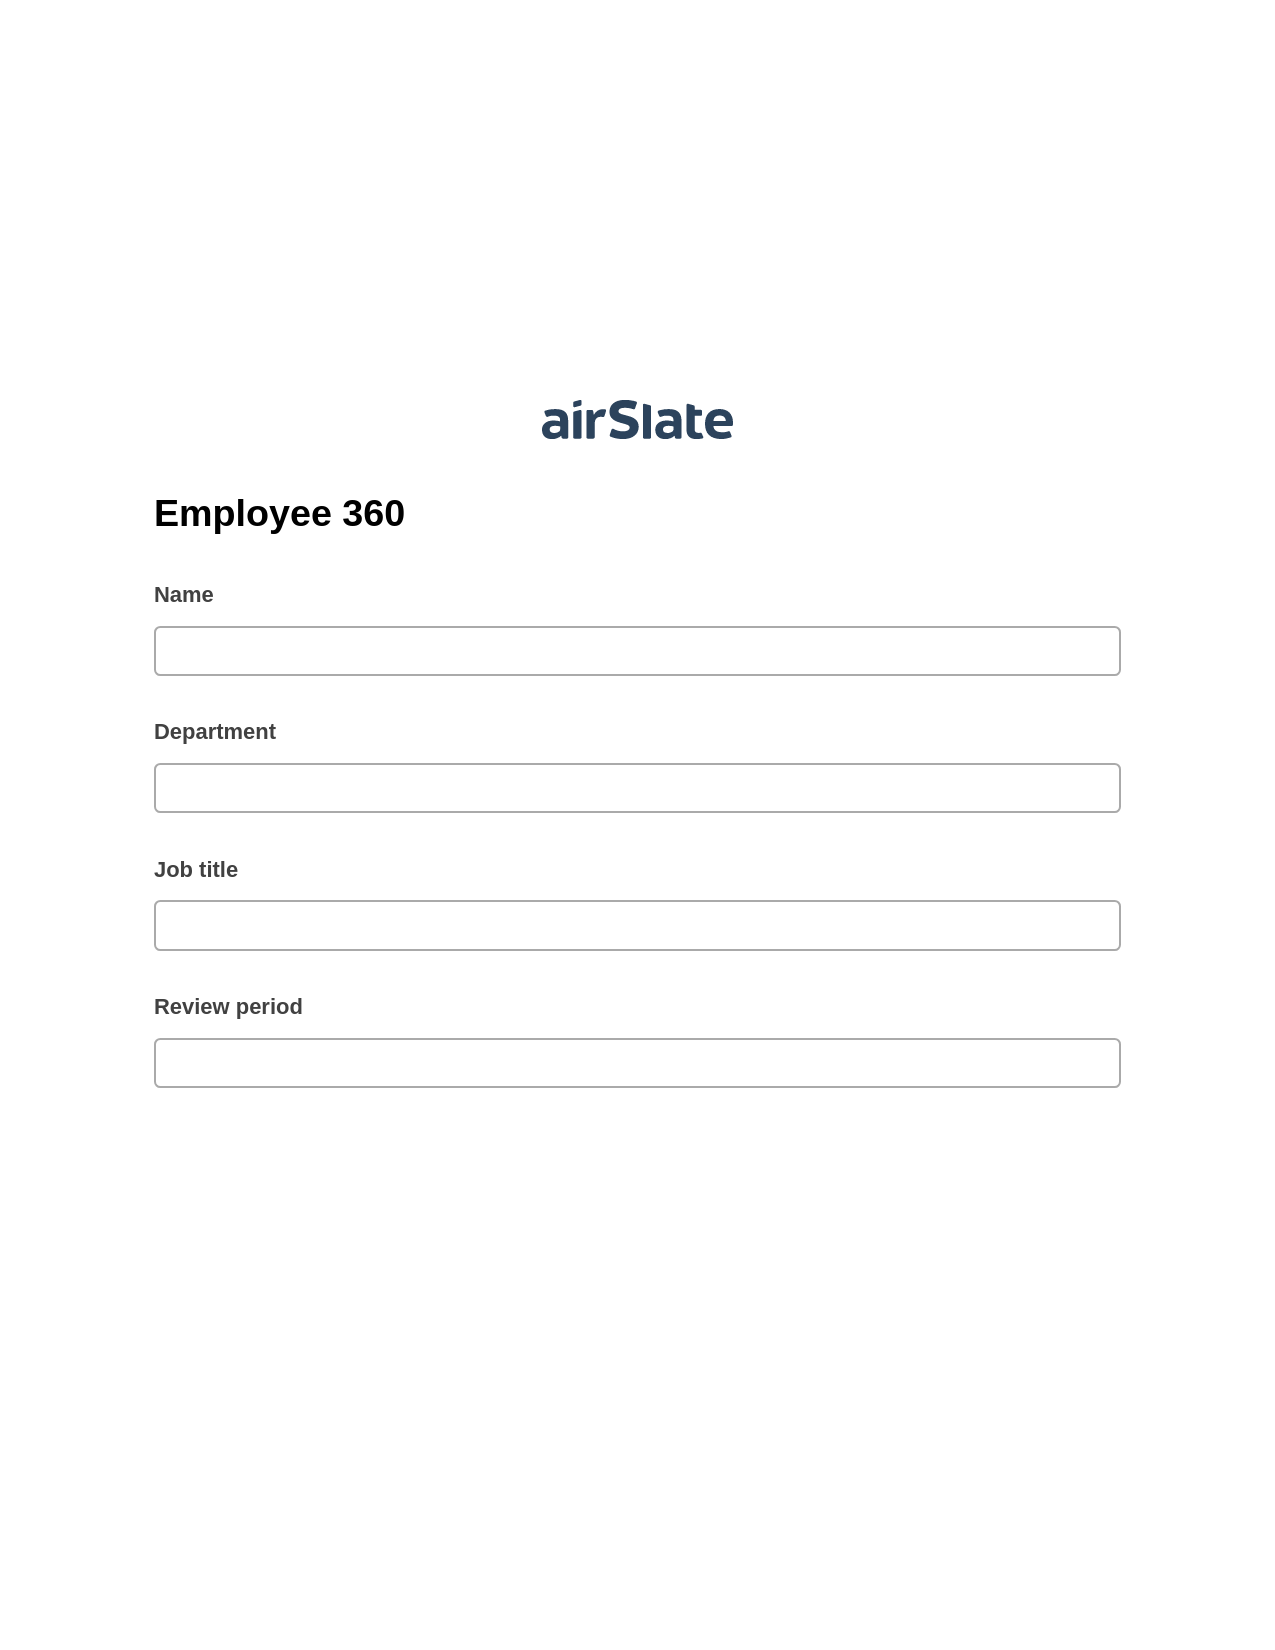 Employee 360 Pre-fill from Excel Spreadsheet Bot, Invoke Salesforce Process Bot, Export to Excel 365 Bot